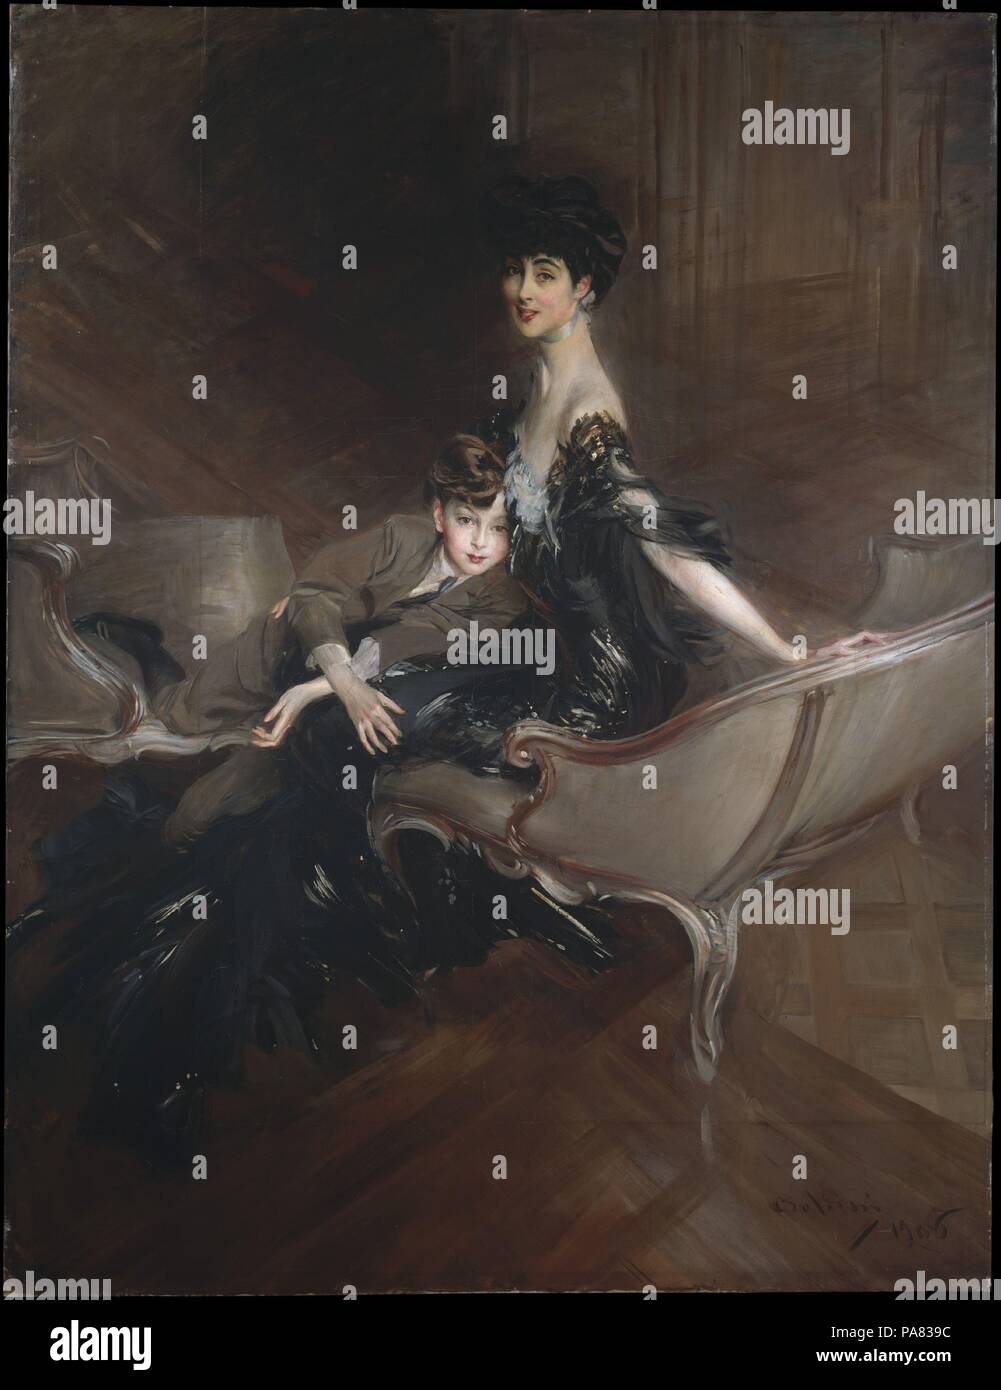 Consuelo Vanderbilt (1876-1964), Duchess of Marlborough, and Her Son, Lord Ivor Spencer-Churchill (1898-1956). Artist: Giovanni Boldini (Italian, Ferrara 1842-1931 Paris). Dimensions: 87 1/4 x 67 in. (221.6 x 170.2 cm). Date: 1906.  Strikingly beautiful, elegant, and wealthy, with a distinguished family pedigree to match, Consuelo Vanderbilt was the doyenne of international high society. Boldini, one of the most sought-after portraitists of the day, reportedly asked to paint her when she was visiting Paris, finding her 'divine.' Delighted with the picture, she requested that he enlarge it and  Stock Photo